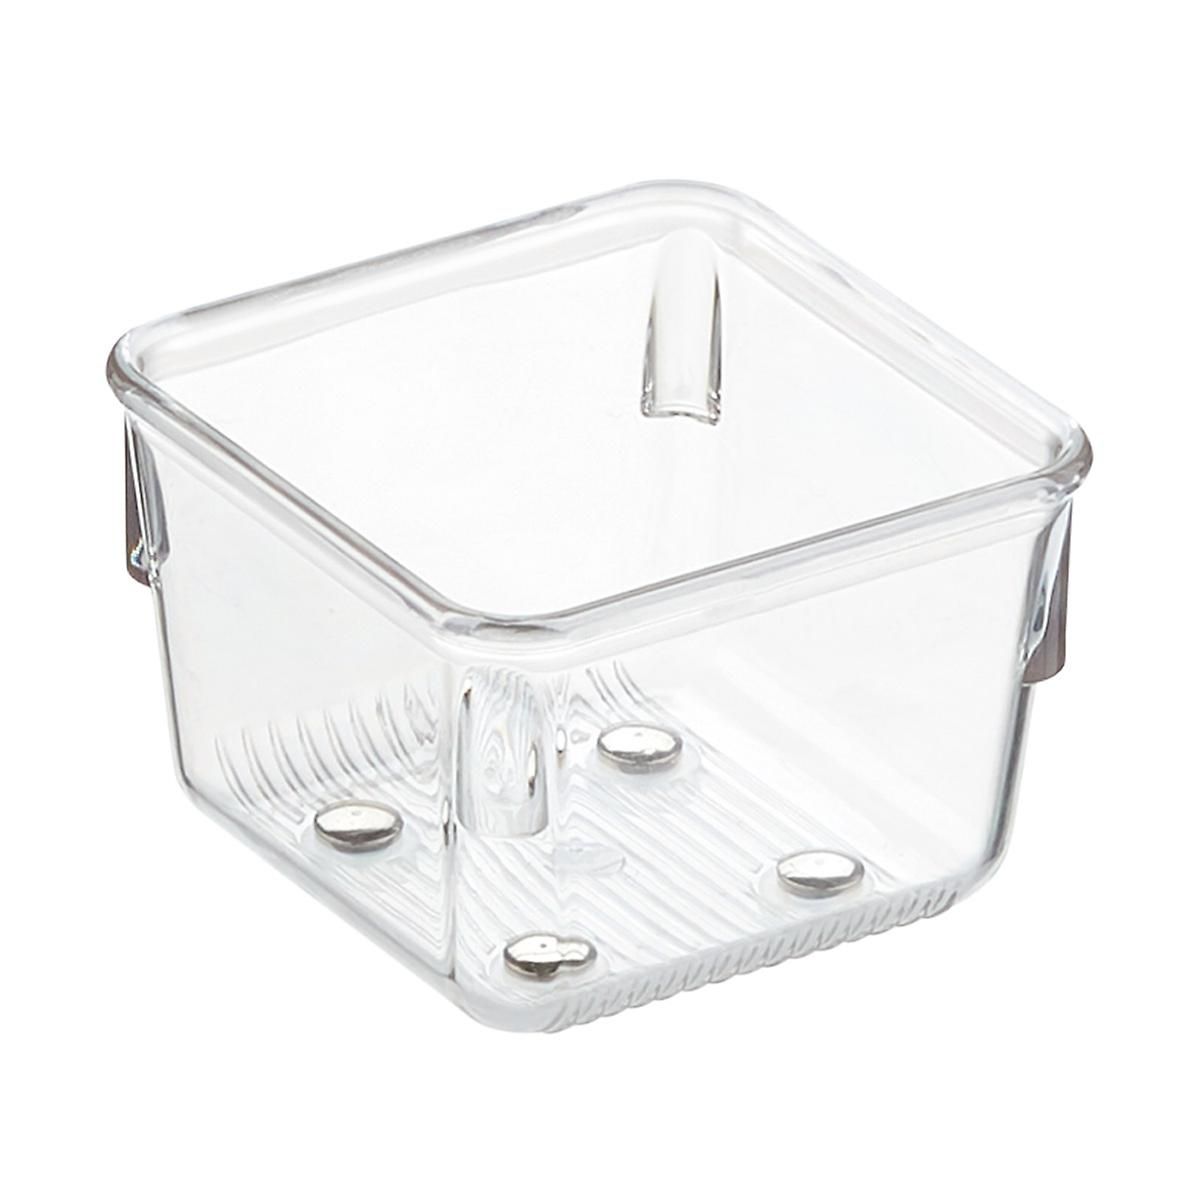 iDESIGN Linus Shallow Drawer Organizer Clear | The Container Store